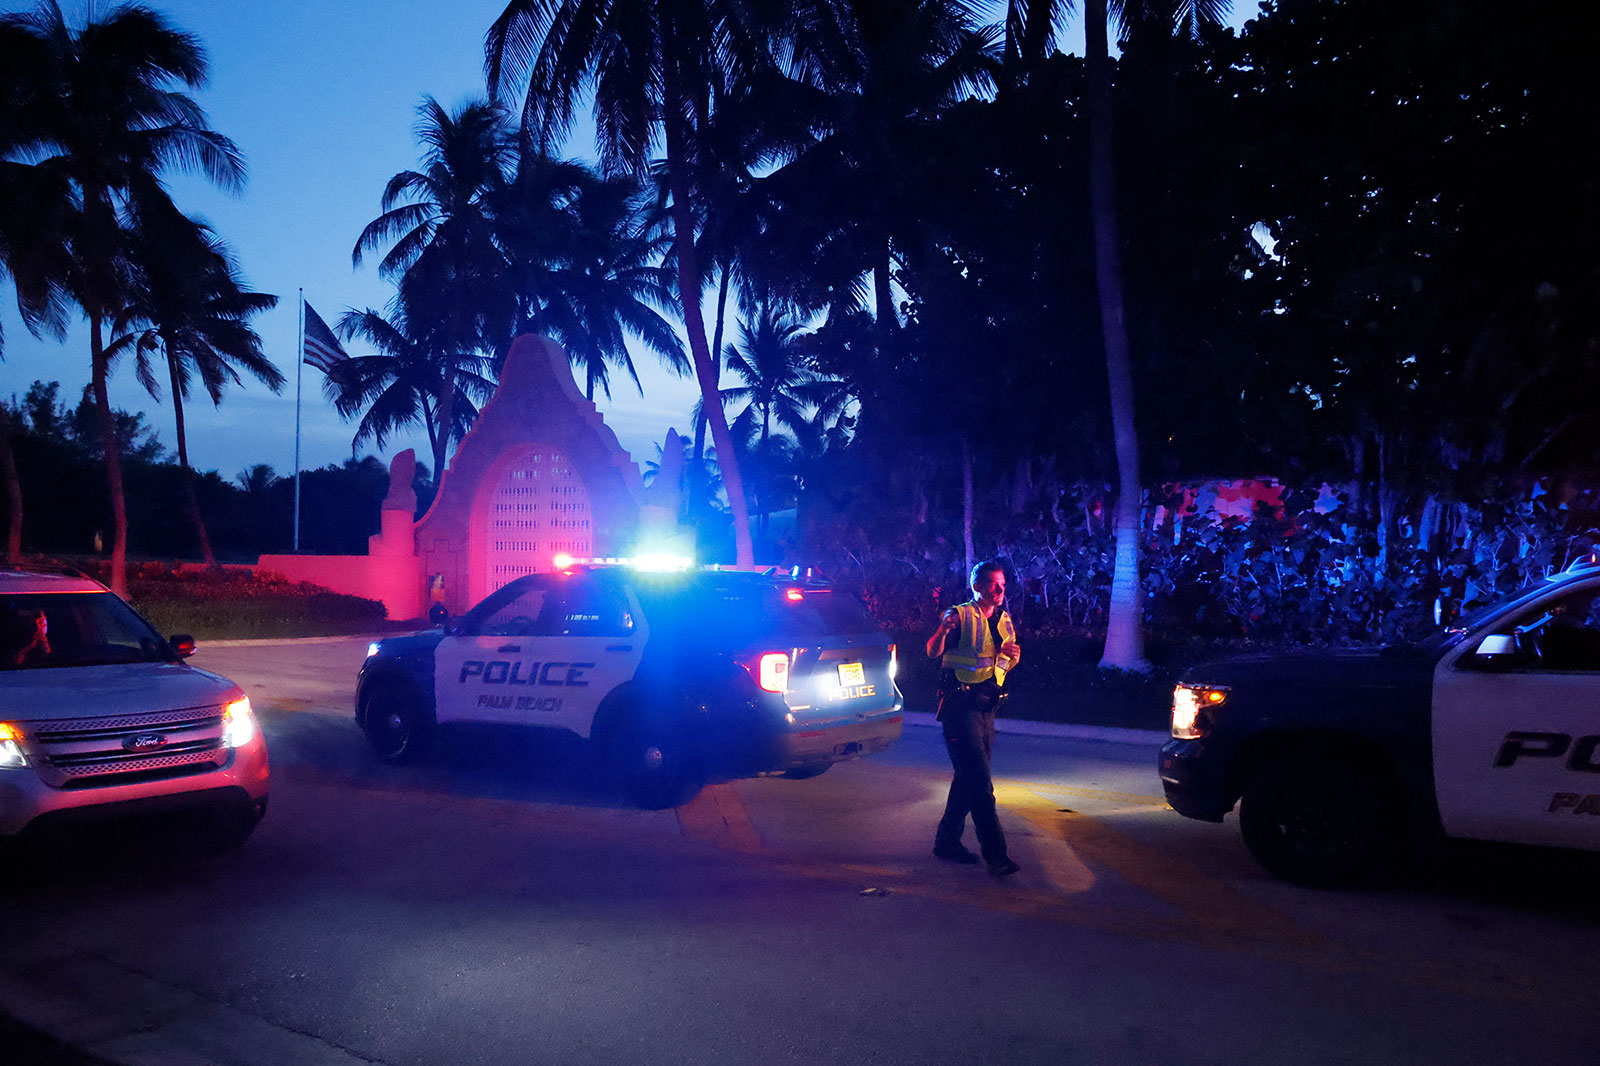 Police direct traffic outside an entrance to former President Donald Trump's Mar-a-Lago estate on Monday, August 8, in Palm Beach, Florida.